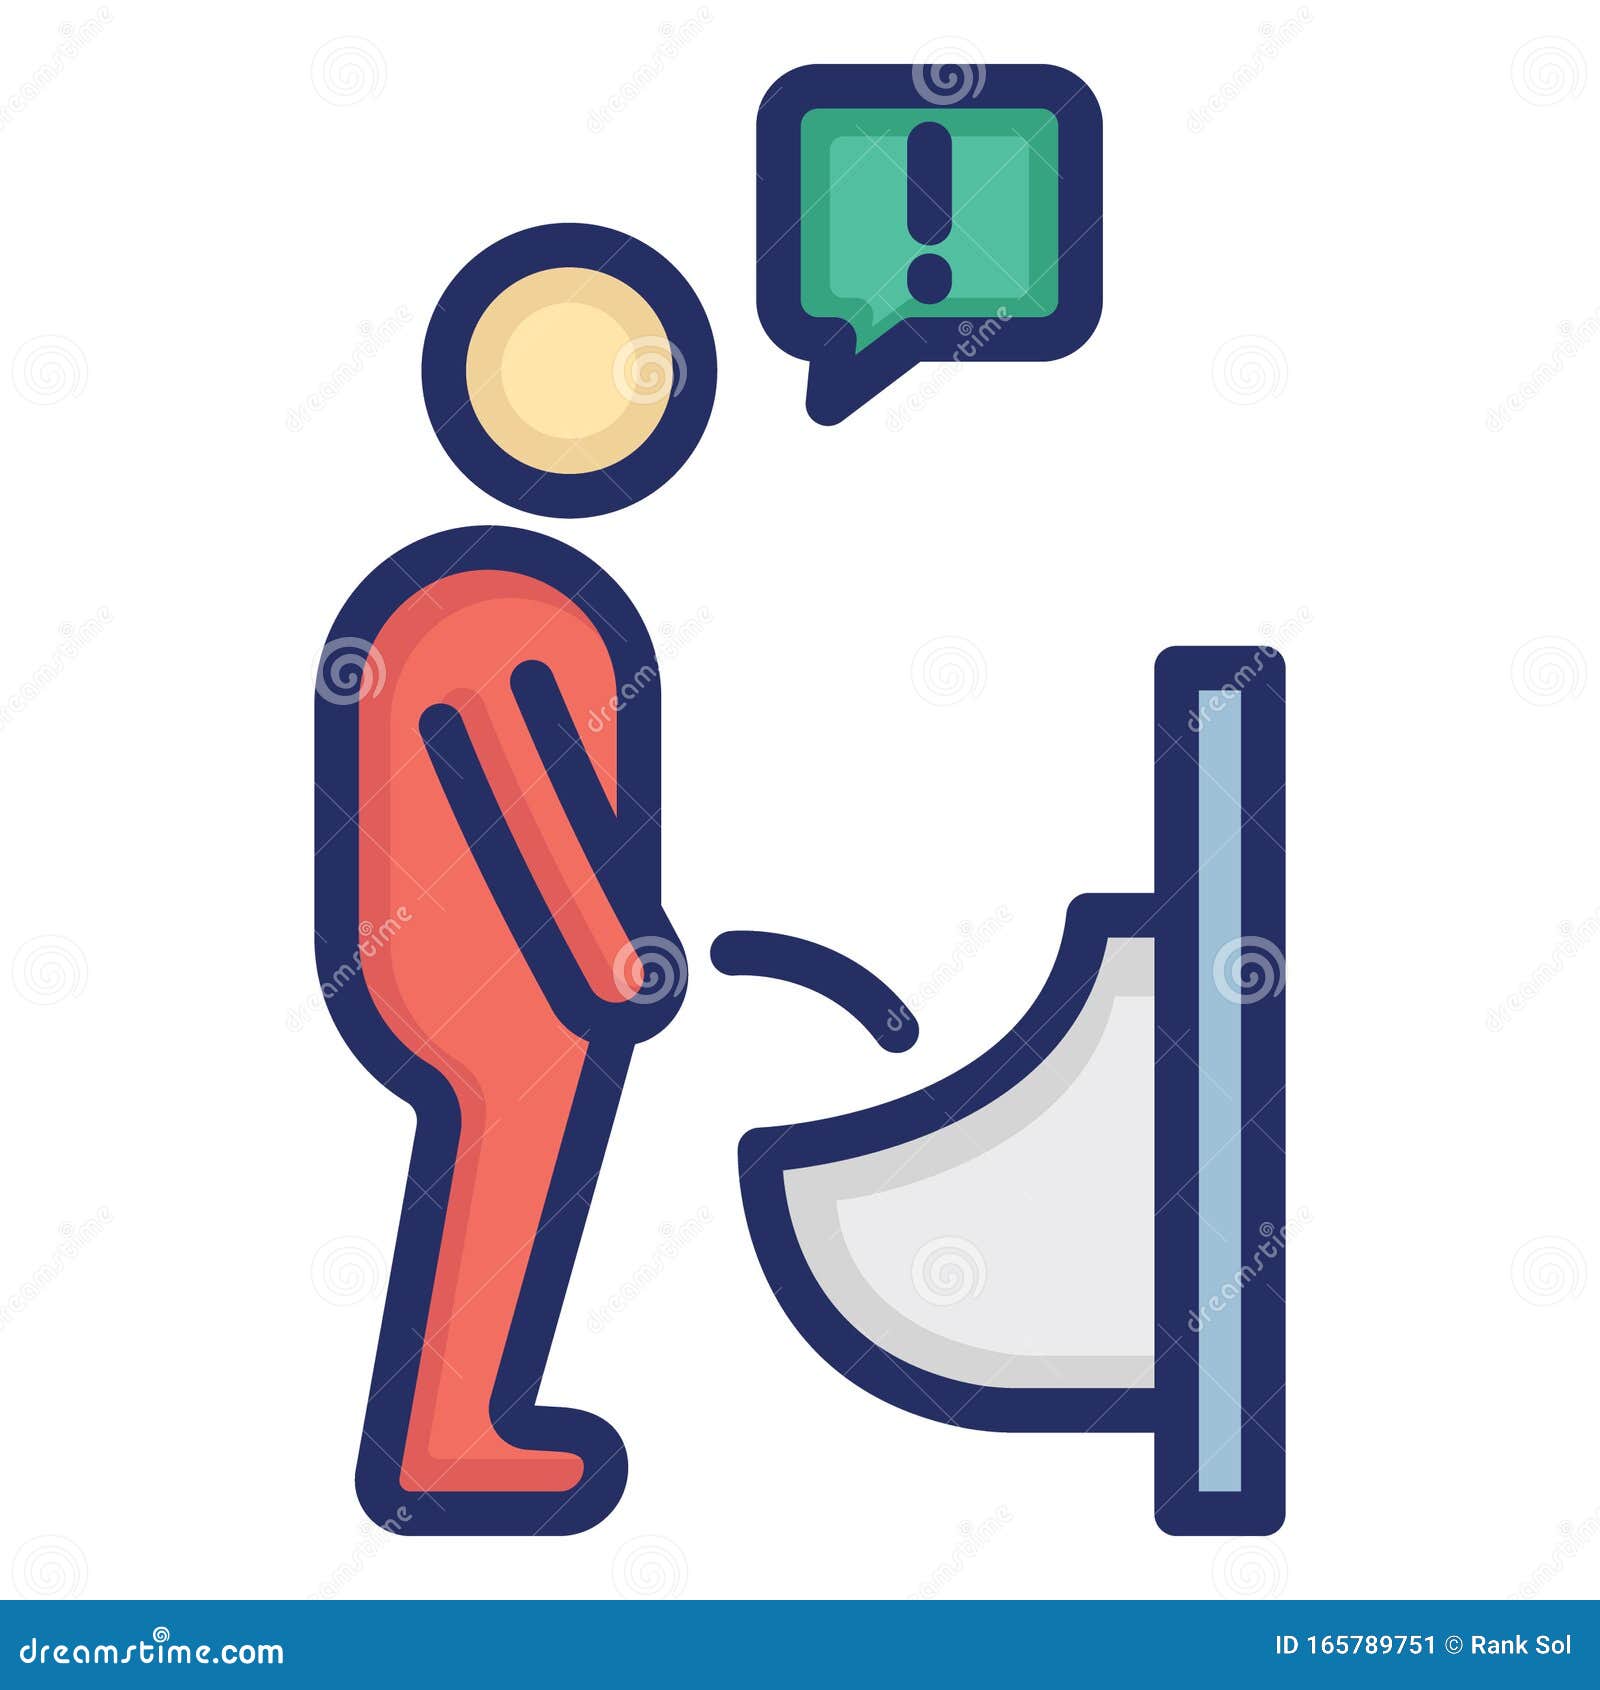 urinate   icon that can be easily modified or edit